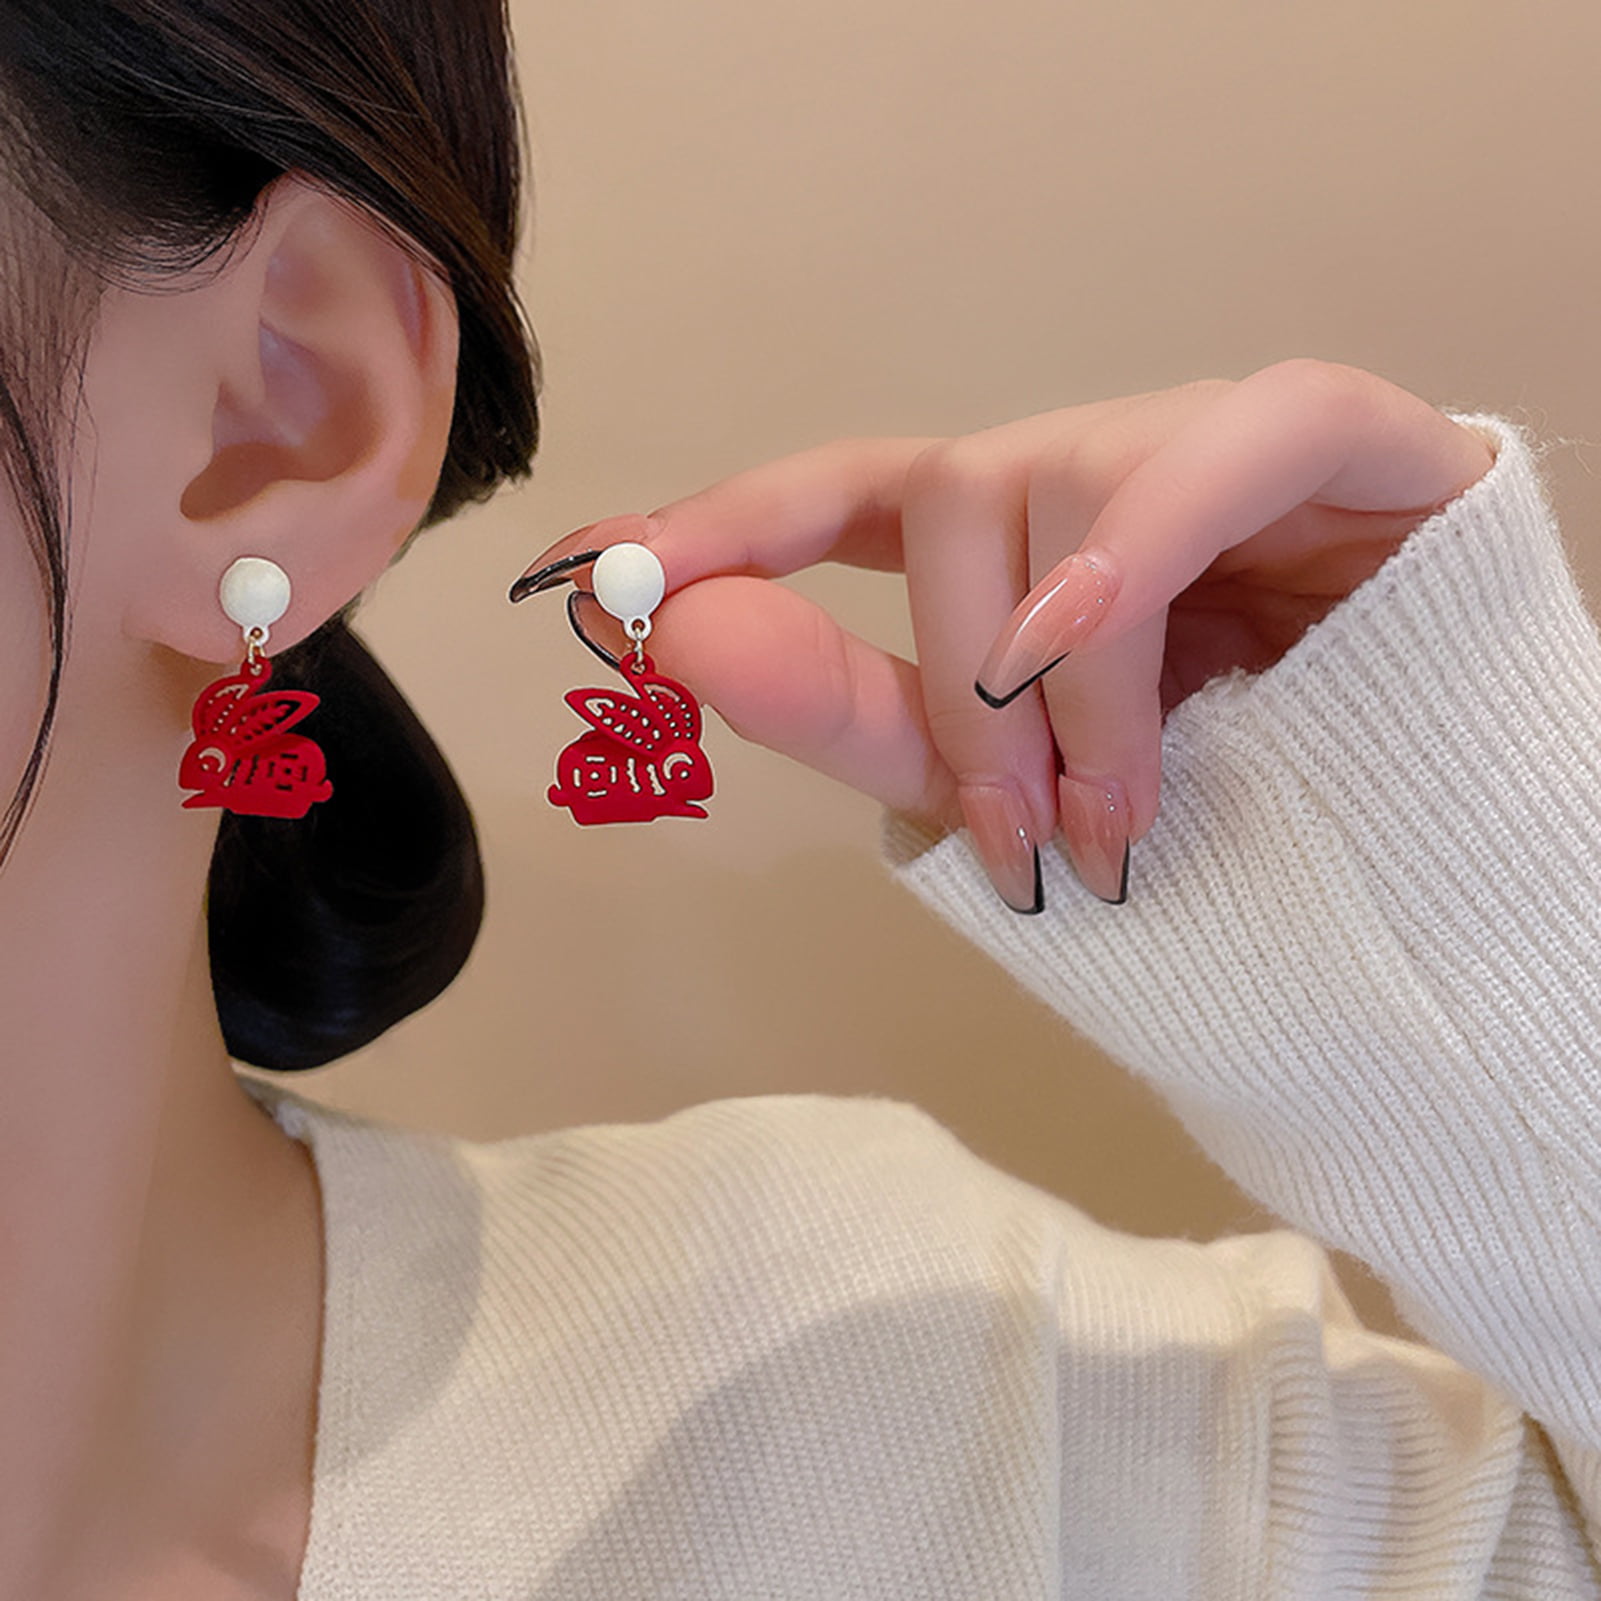 Anvazise 1 Pair Dangle Earrings Rabbit Decor Chinese Characters Romantic Auspicious Faux Pearls Ear Ornament Vintage Red Cutting Paper Clothing Acces 6be373e5 b1e7 4729 ae41 25aad1b19360.7fa9612a5fb782e91c1878a5df8e02bb